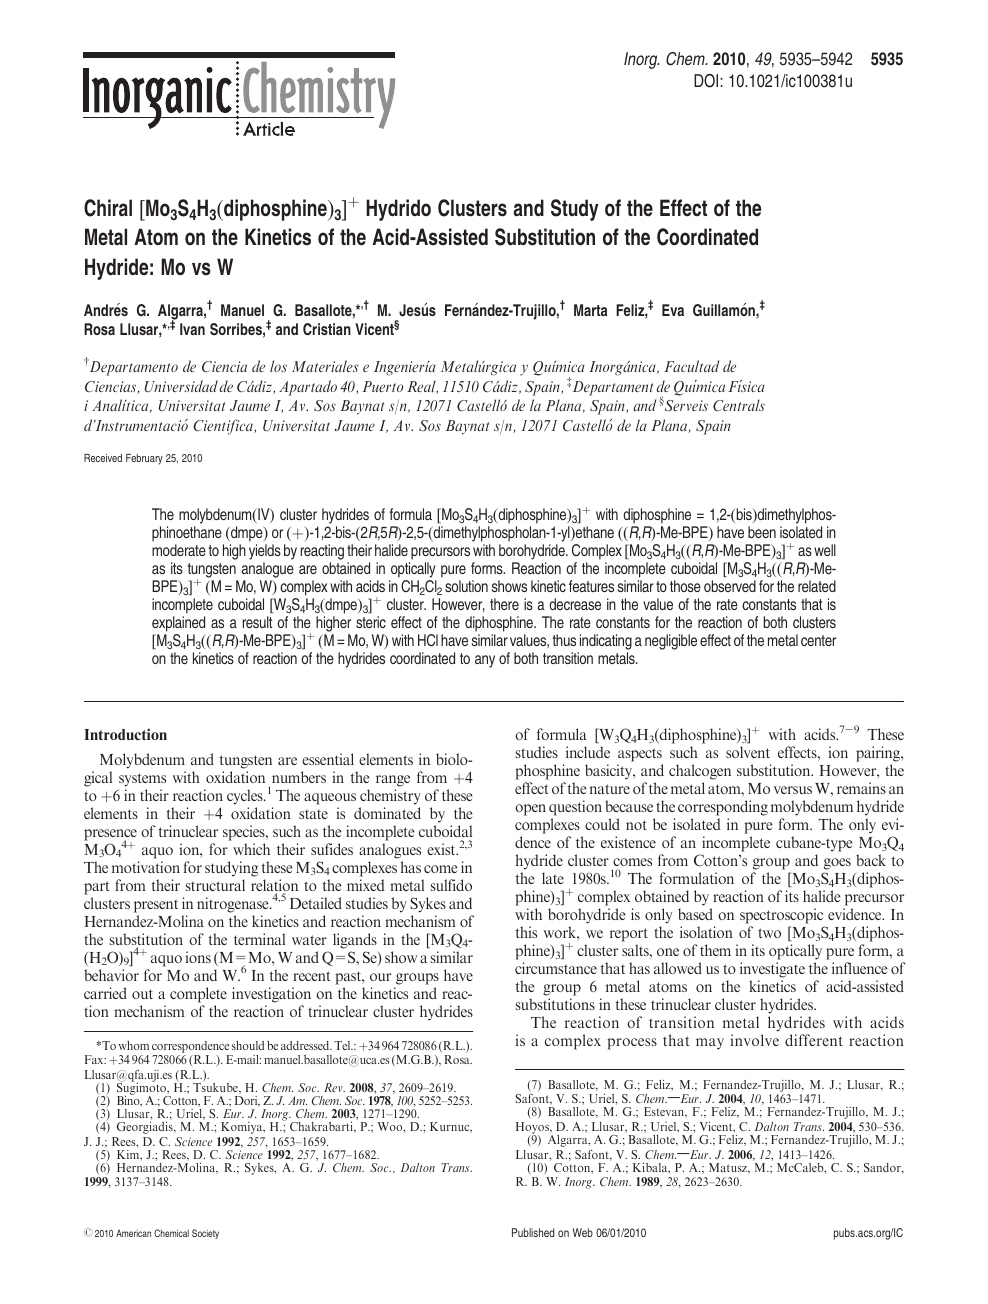 Chiral Mo 3 S 4 H 3 Diphosphine 3 Hydrido Clusters And Study Of The Effect Of The Metal Atom On The Kinetics Of The Acid Assisted Substitution Of The Coordinated